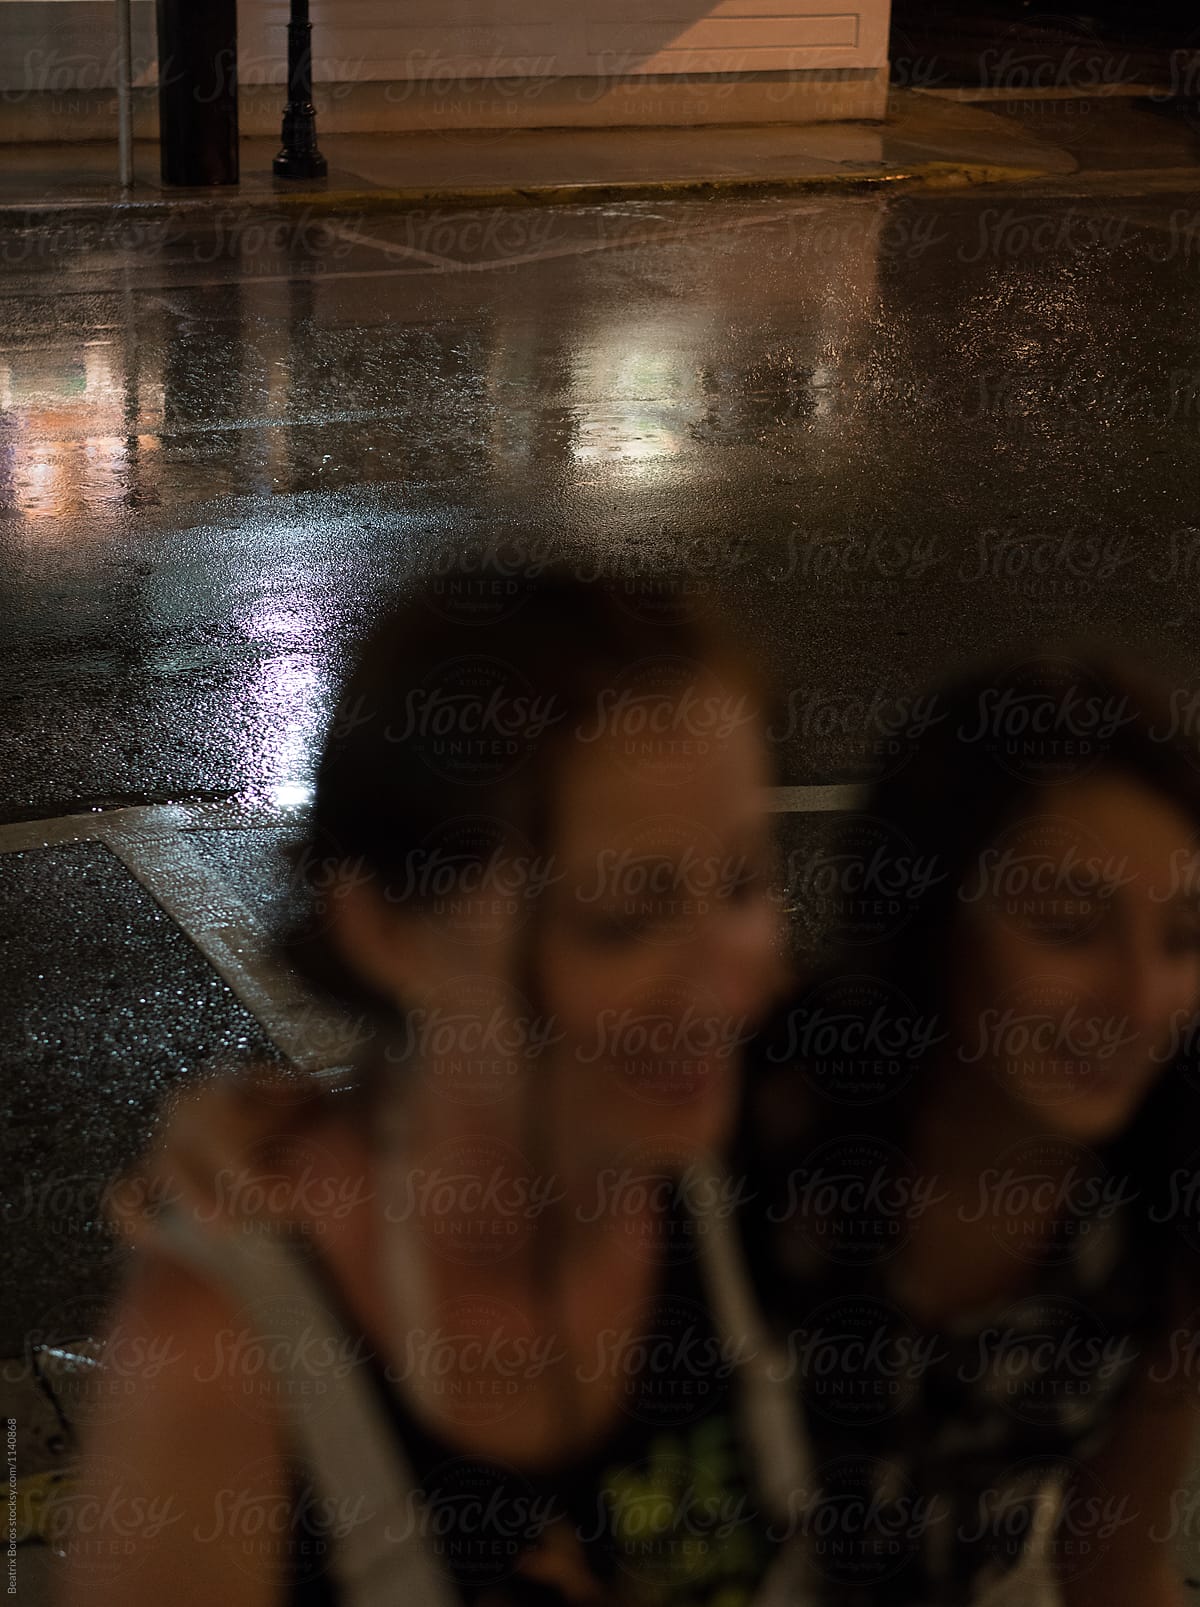 It's raining, two blurry people in the foreground